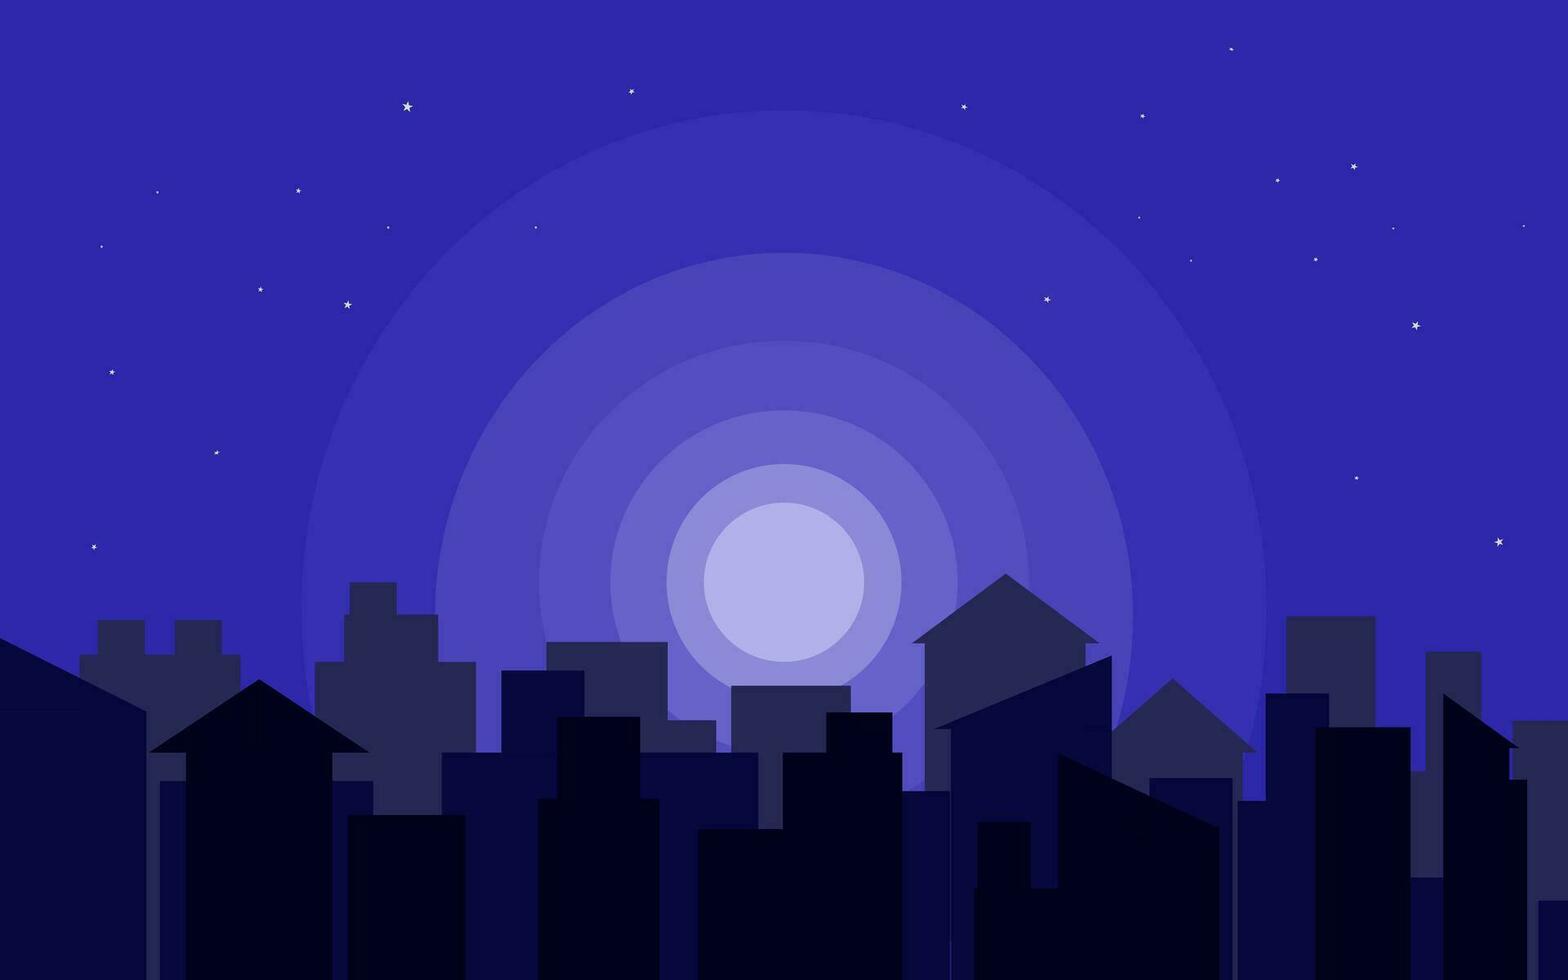 Night city with Moon Flat Design vector